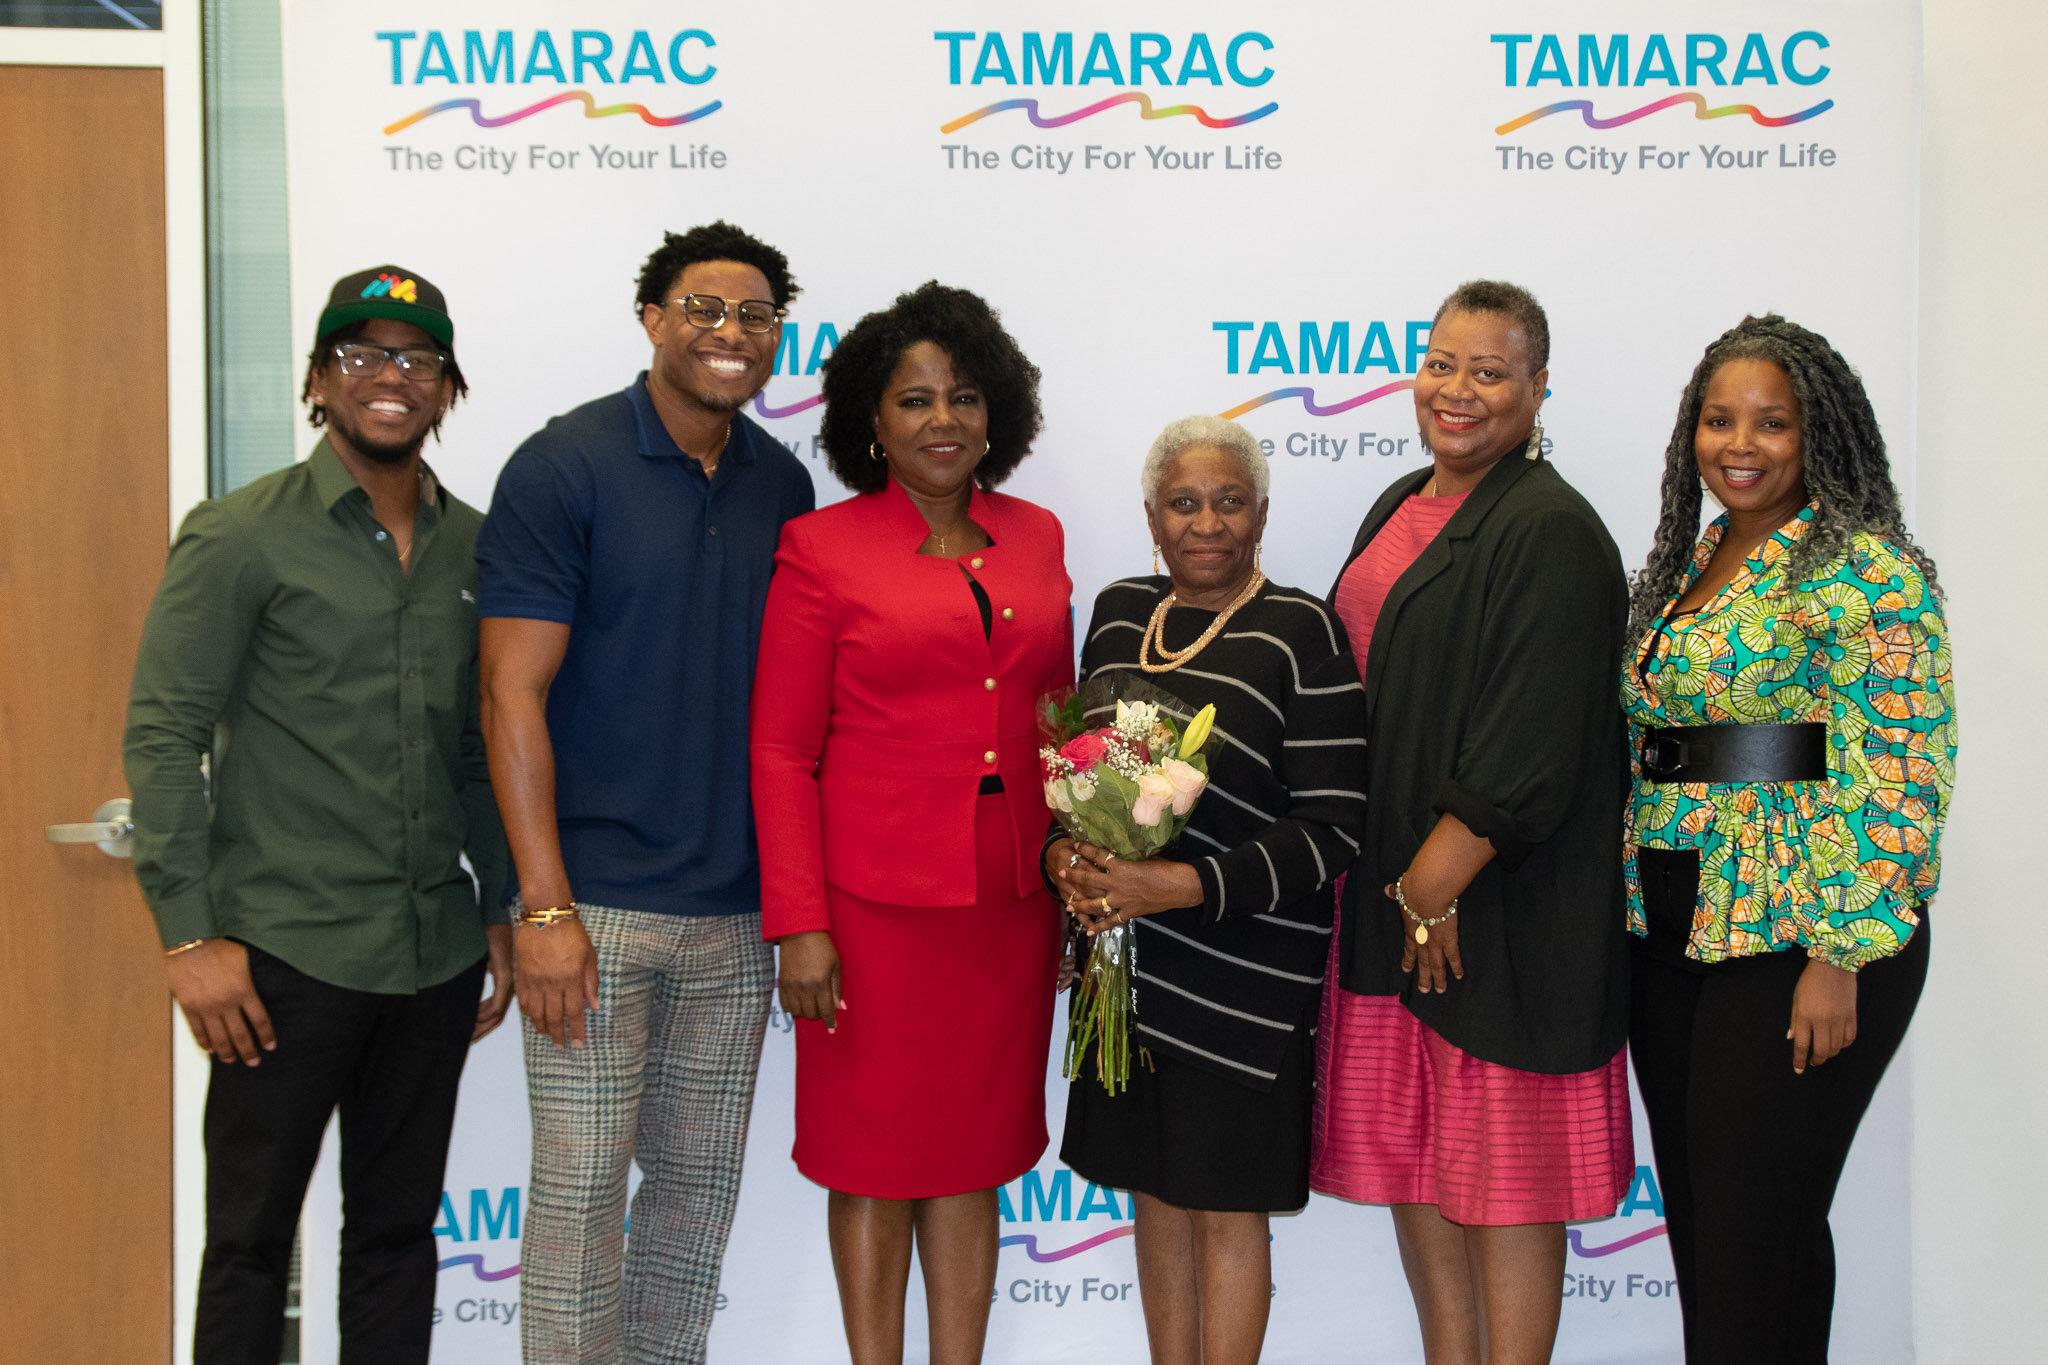 Another moment I won't forget was celebrating our 2023 Black History Month Honorees 💜 This year's nominees were: 

▪Dr. Tameka Bradley Hobbs, Library Regional Manager at the African American Research Library and Cultural Center
▪Anthea Pennant Assoc